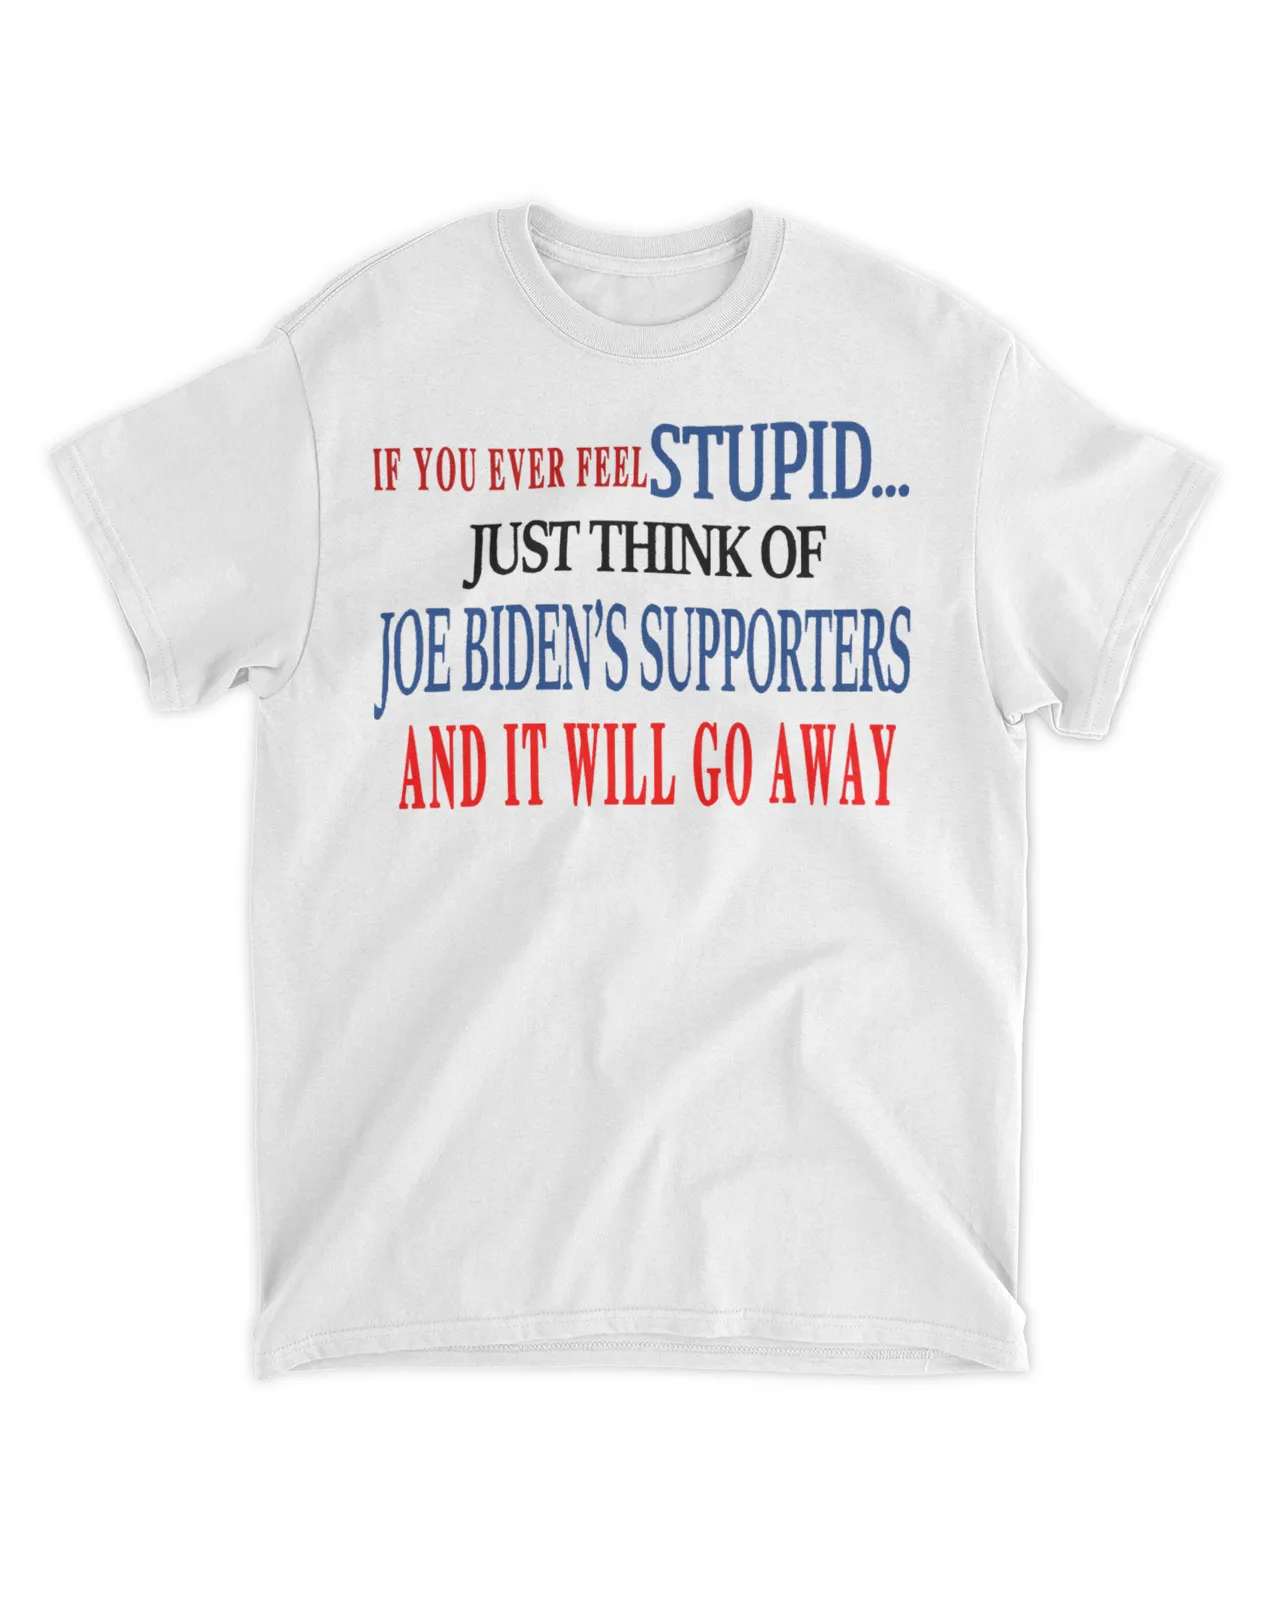  If you ever feel stupid just think of Joe Biden's supporters and it will go away shirt